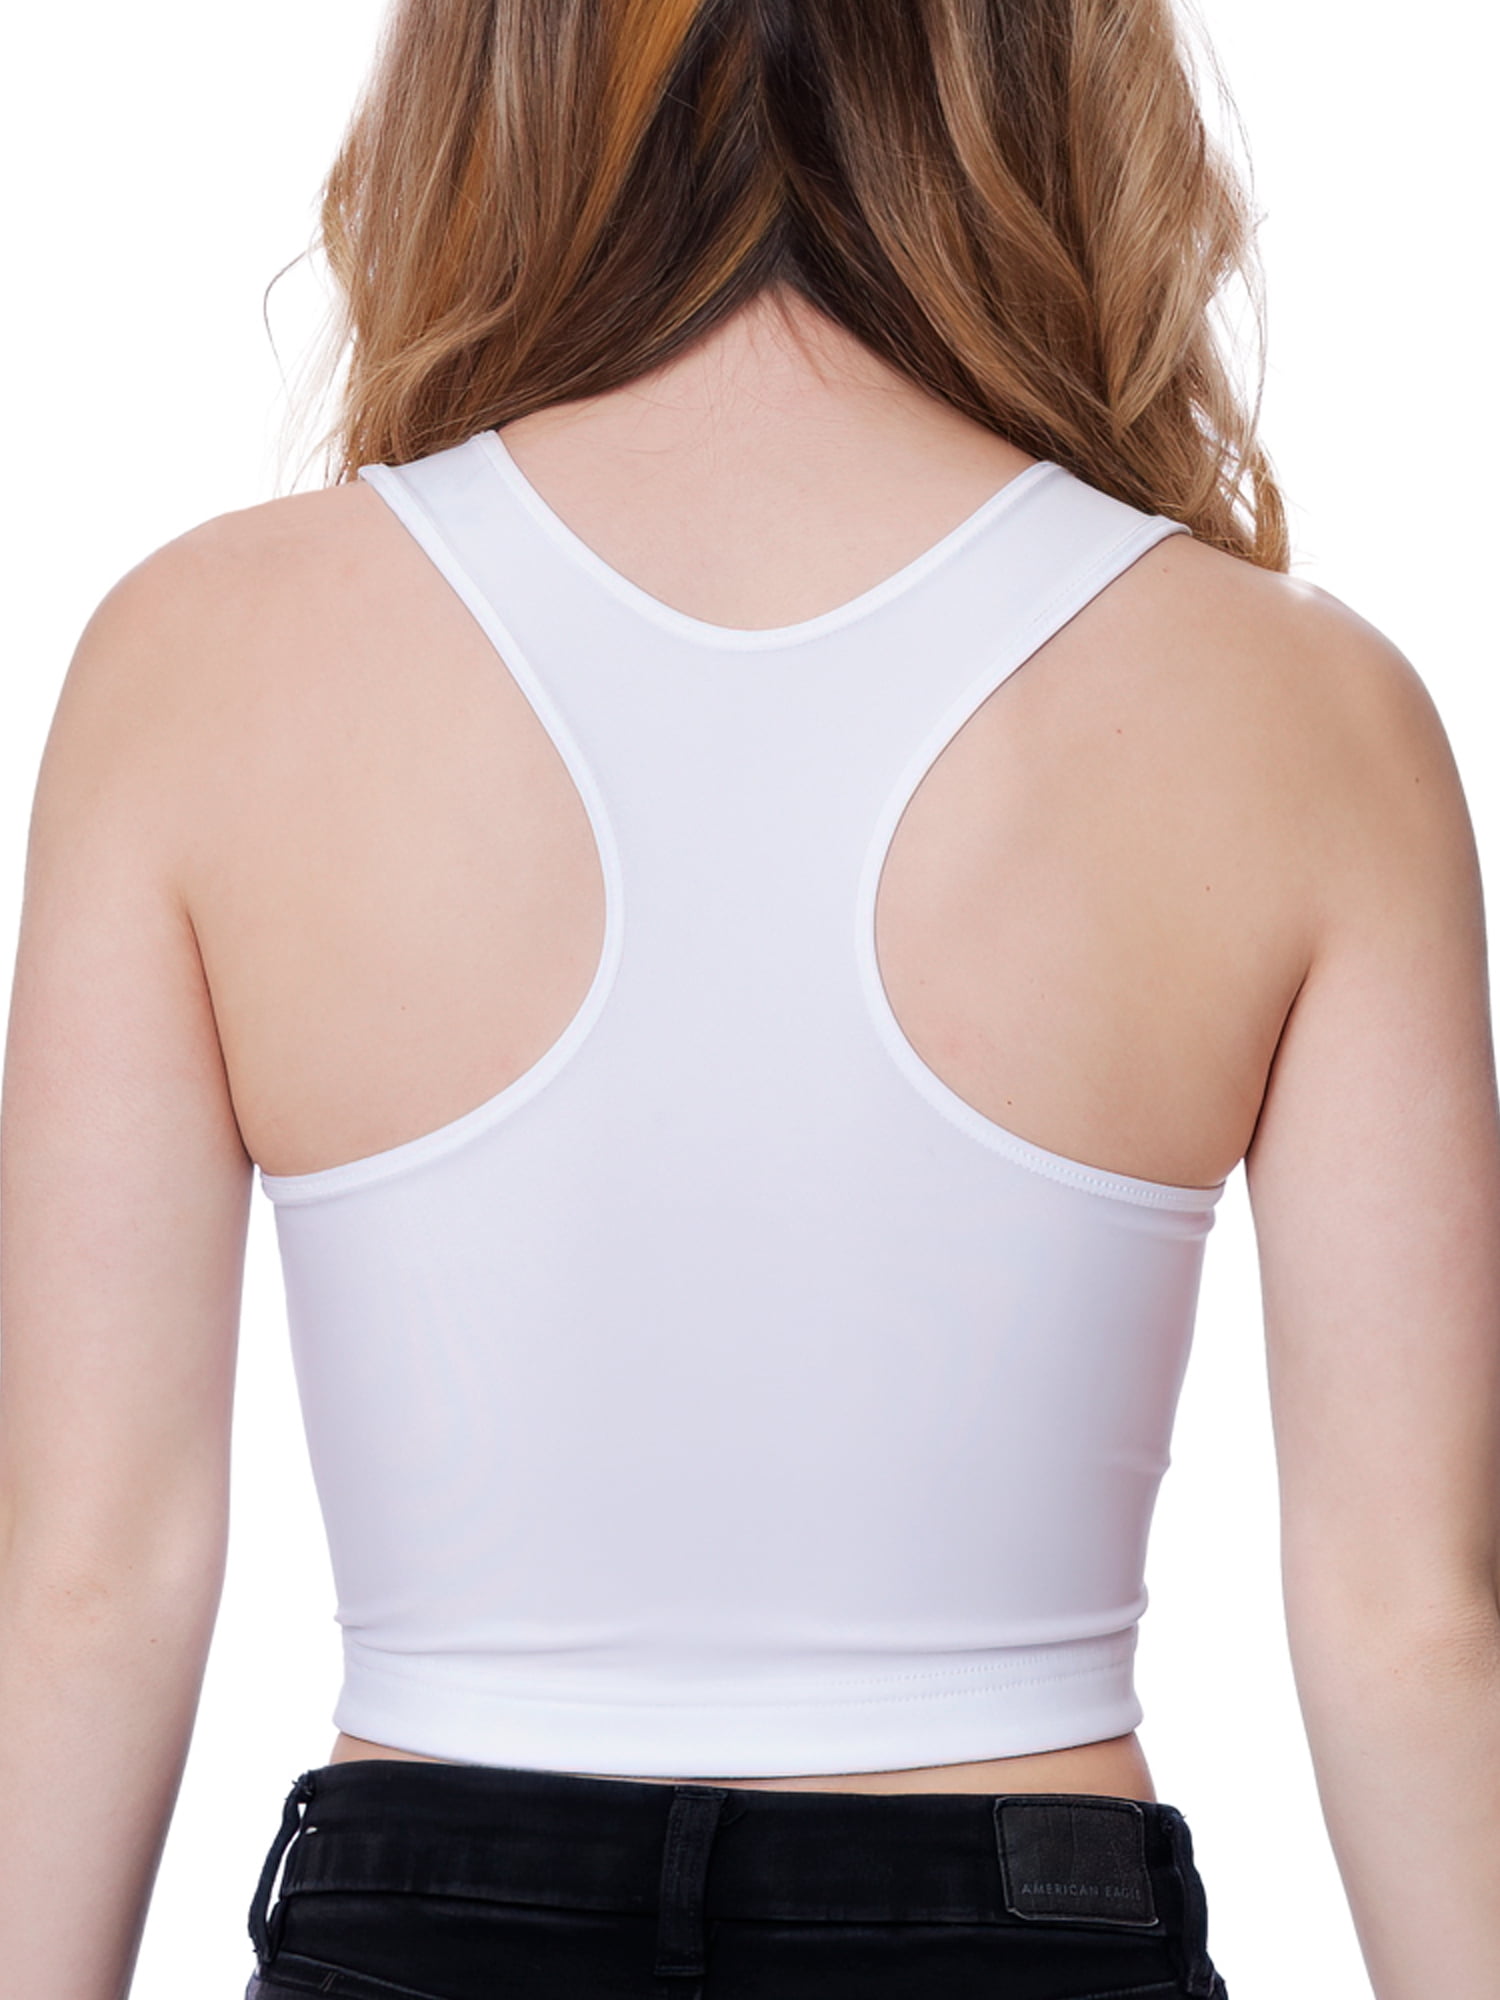 Sports Bra Oversized Thin Womens Tank Top Student Running Shock Absorbing  Weight Gain 200 Pounds Gathered For Shock Absorption Designer Tank Top  Woman4665 From Minerva89, $8.55